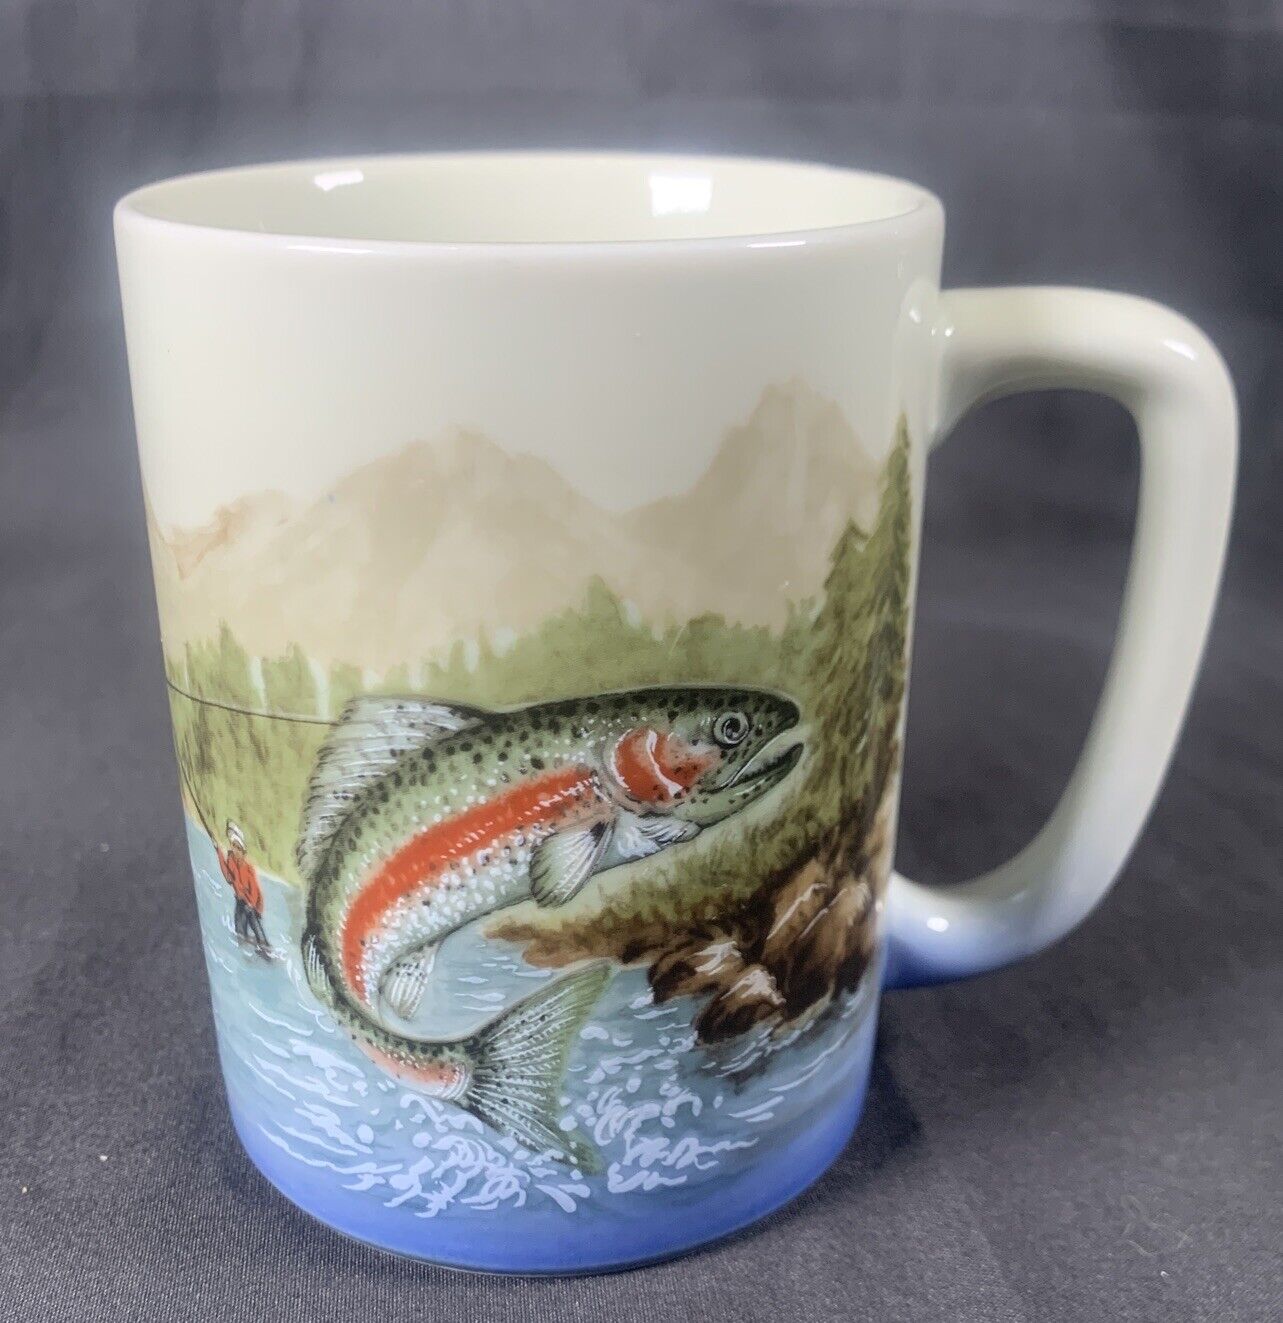 ✨Vintage Otagiri Japan Coffee Mug Fly Fishing Trout Cup Excellent✨